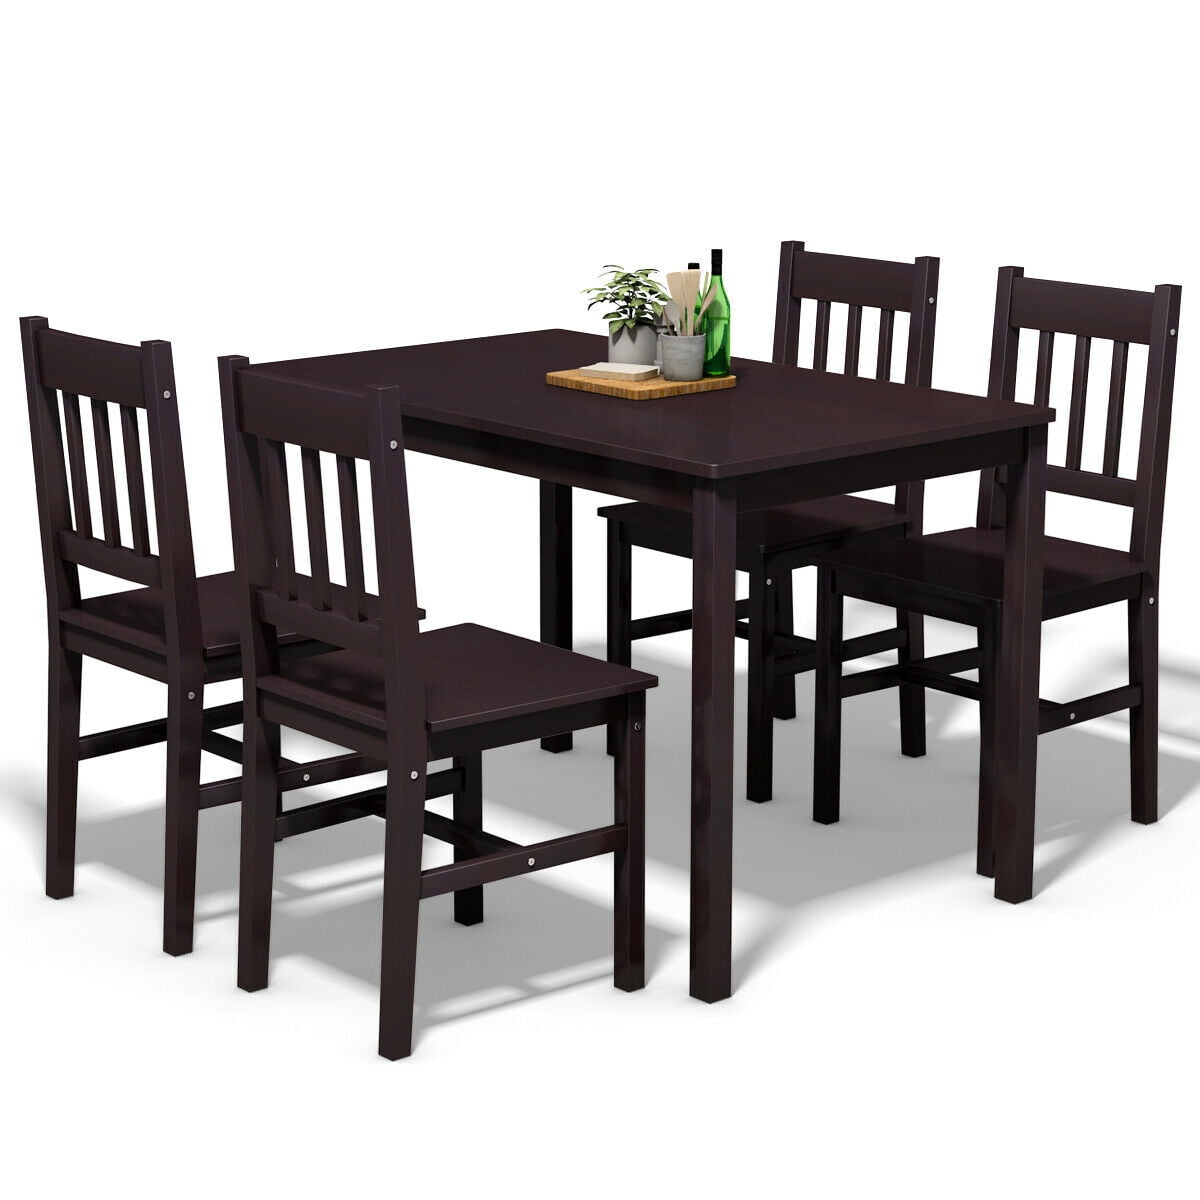 Details about   Costway 5pcs Dining Set Wood Table and 4 Fabric Chairs Home Kitchen Modern